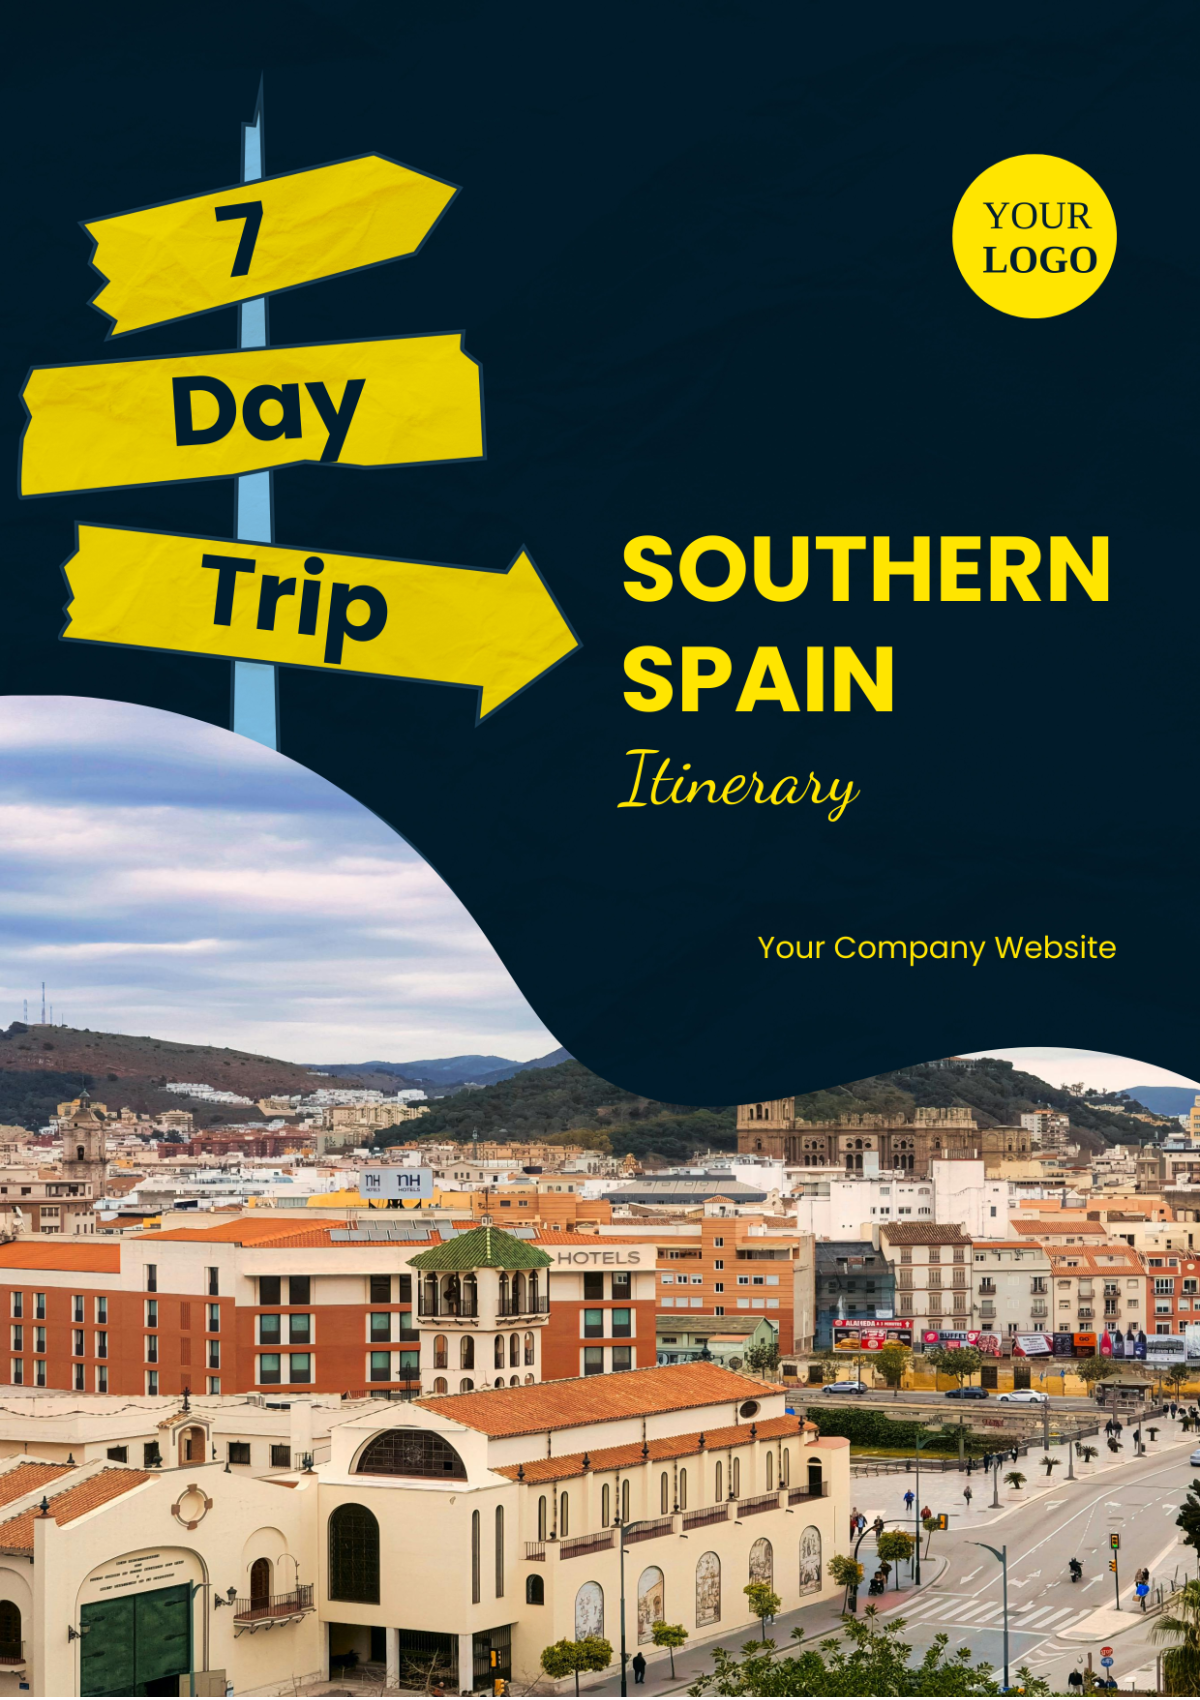 7 Day Southern Spain Itinerary Template